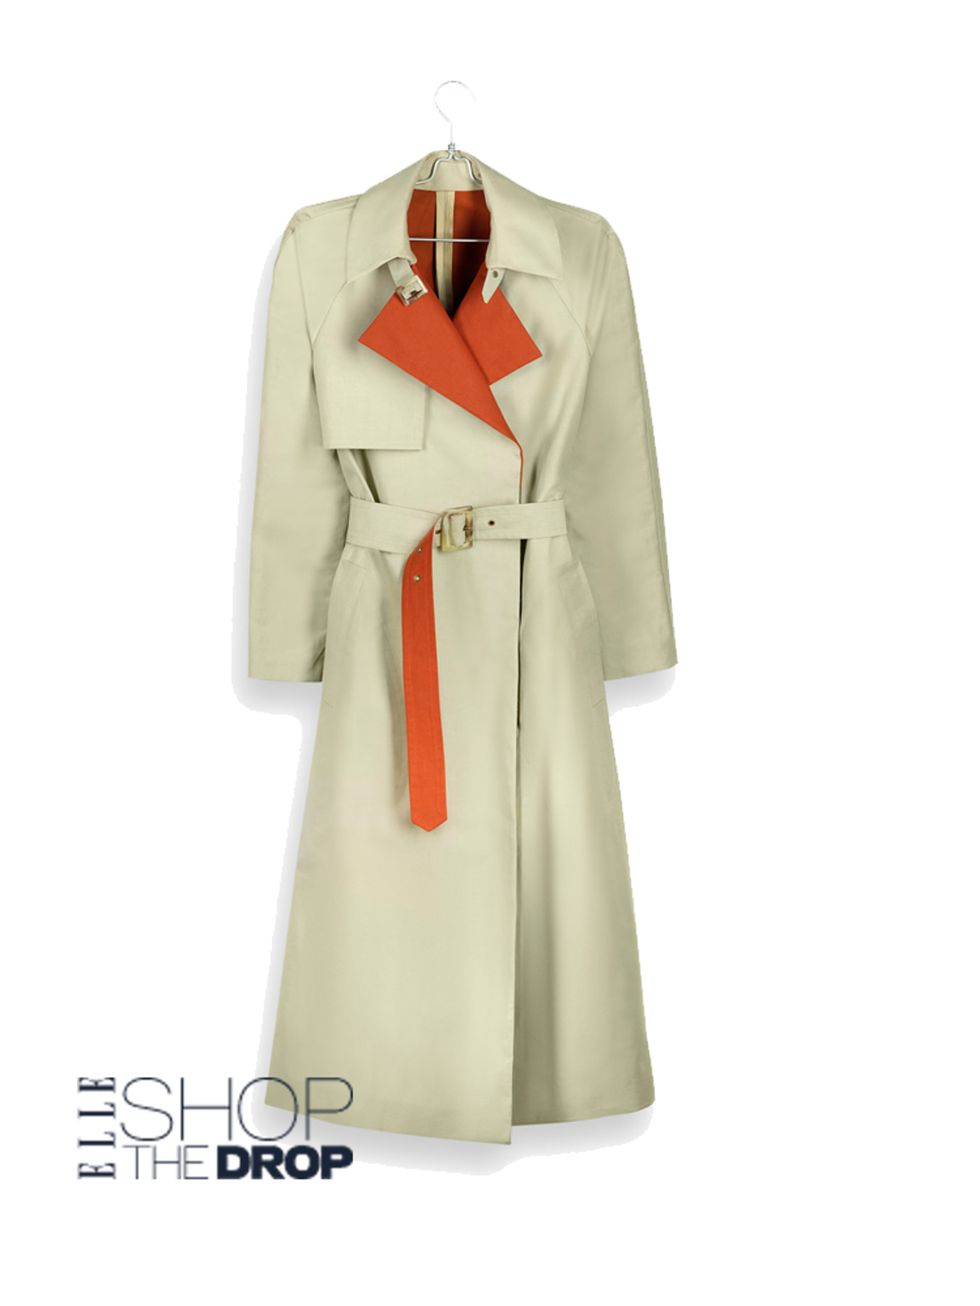 <p>A belted trench is a spring essential. Earn extra style points with this one from London&#39;s coolest new highstreet label, Finery.</p>

<p><a href="https://www.finerylondon.com/uk/products/leverett-bonded-mac?taxon_id=9" target="_blank">Finery</a> co